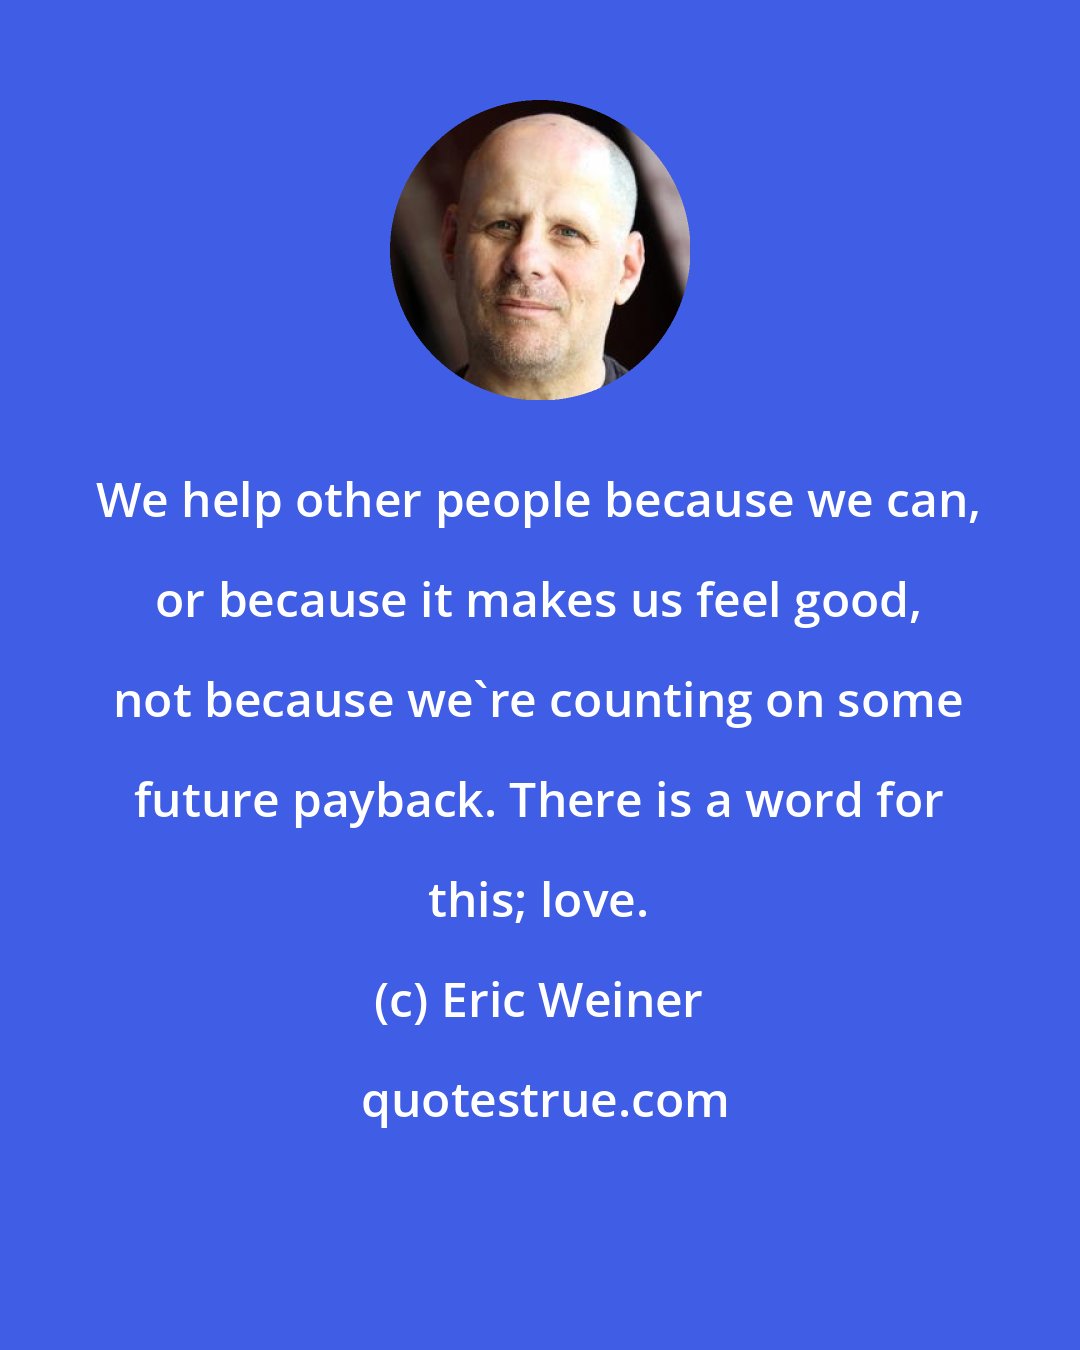 Eric Weiner: We help other people because we can, or because it makes us feel good, not because we're counting on some future payback. There is a word for this; love.